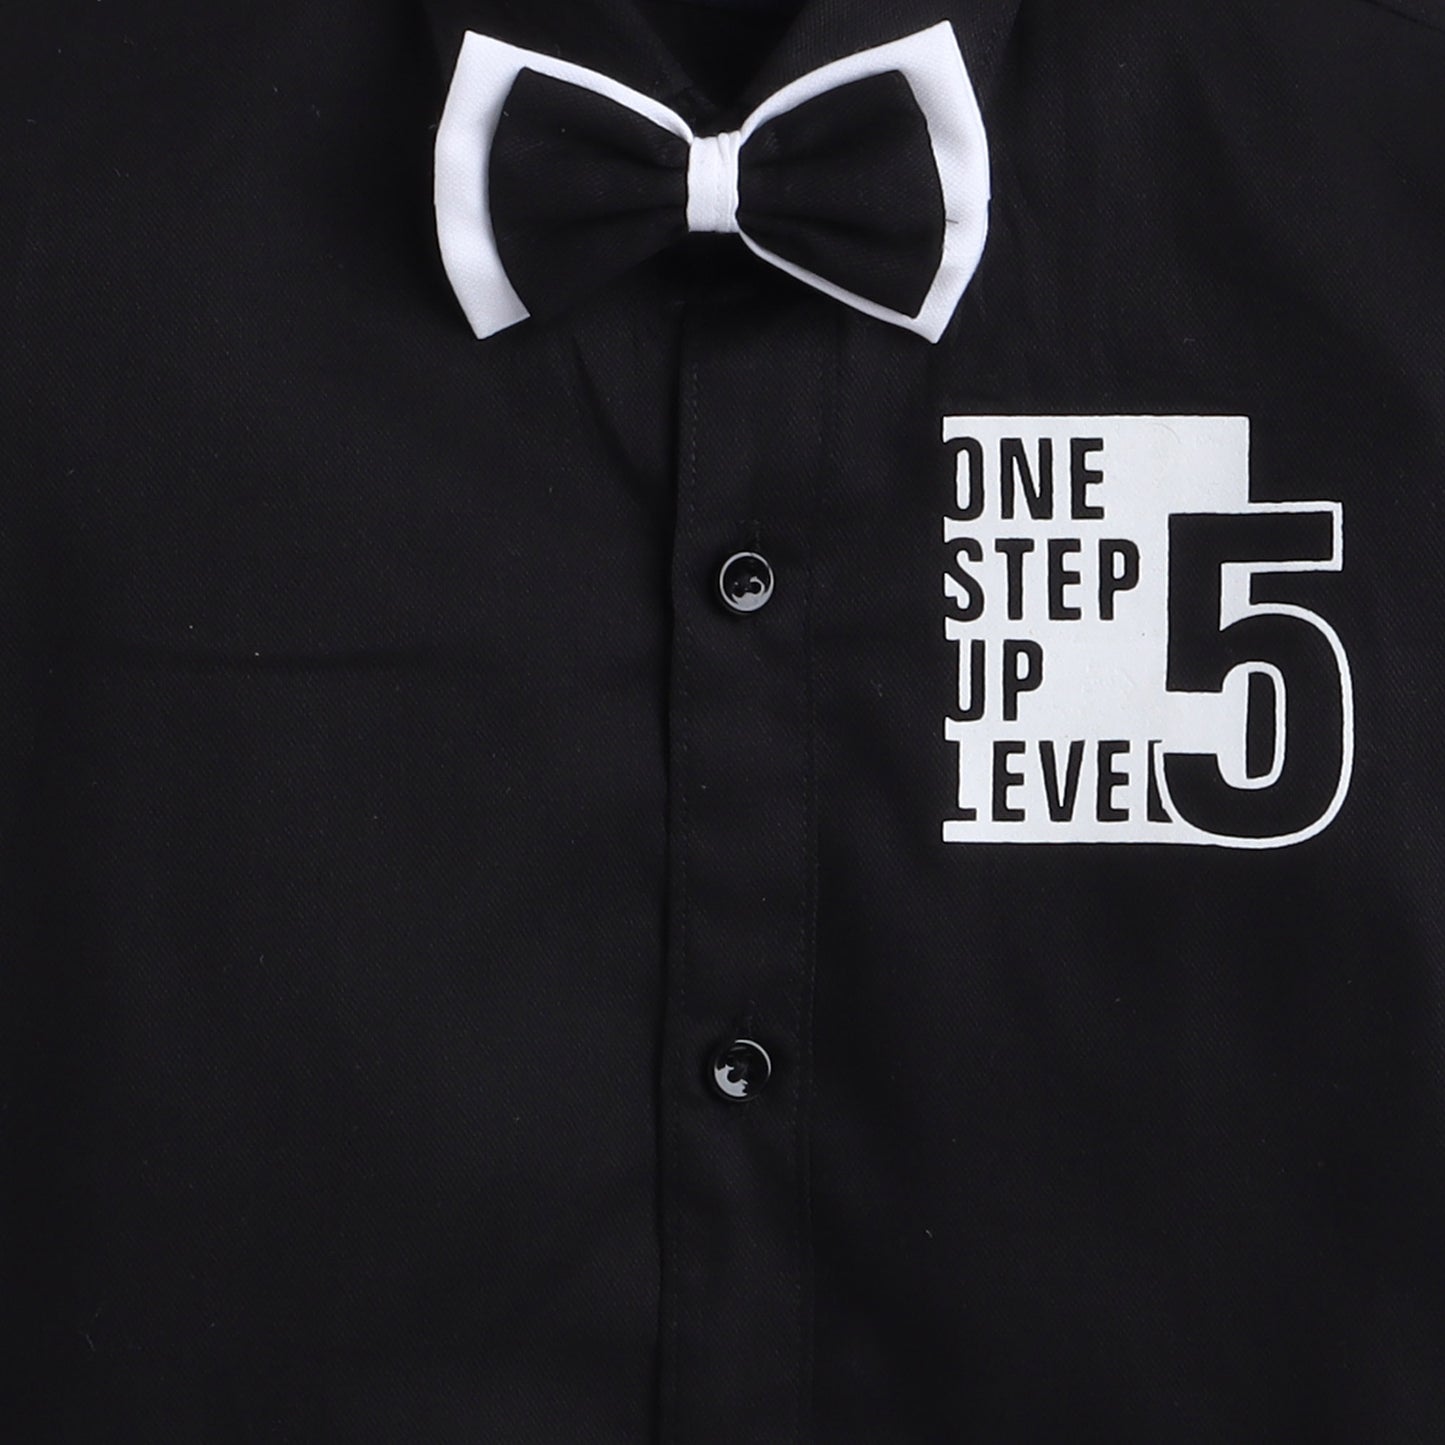  Polka Tots one step five design full sleeve shirt with bow tie - Black